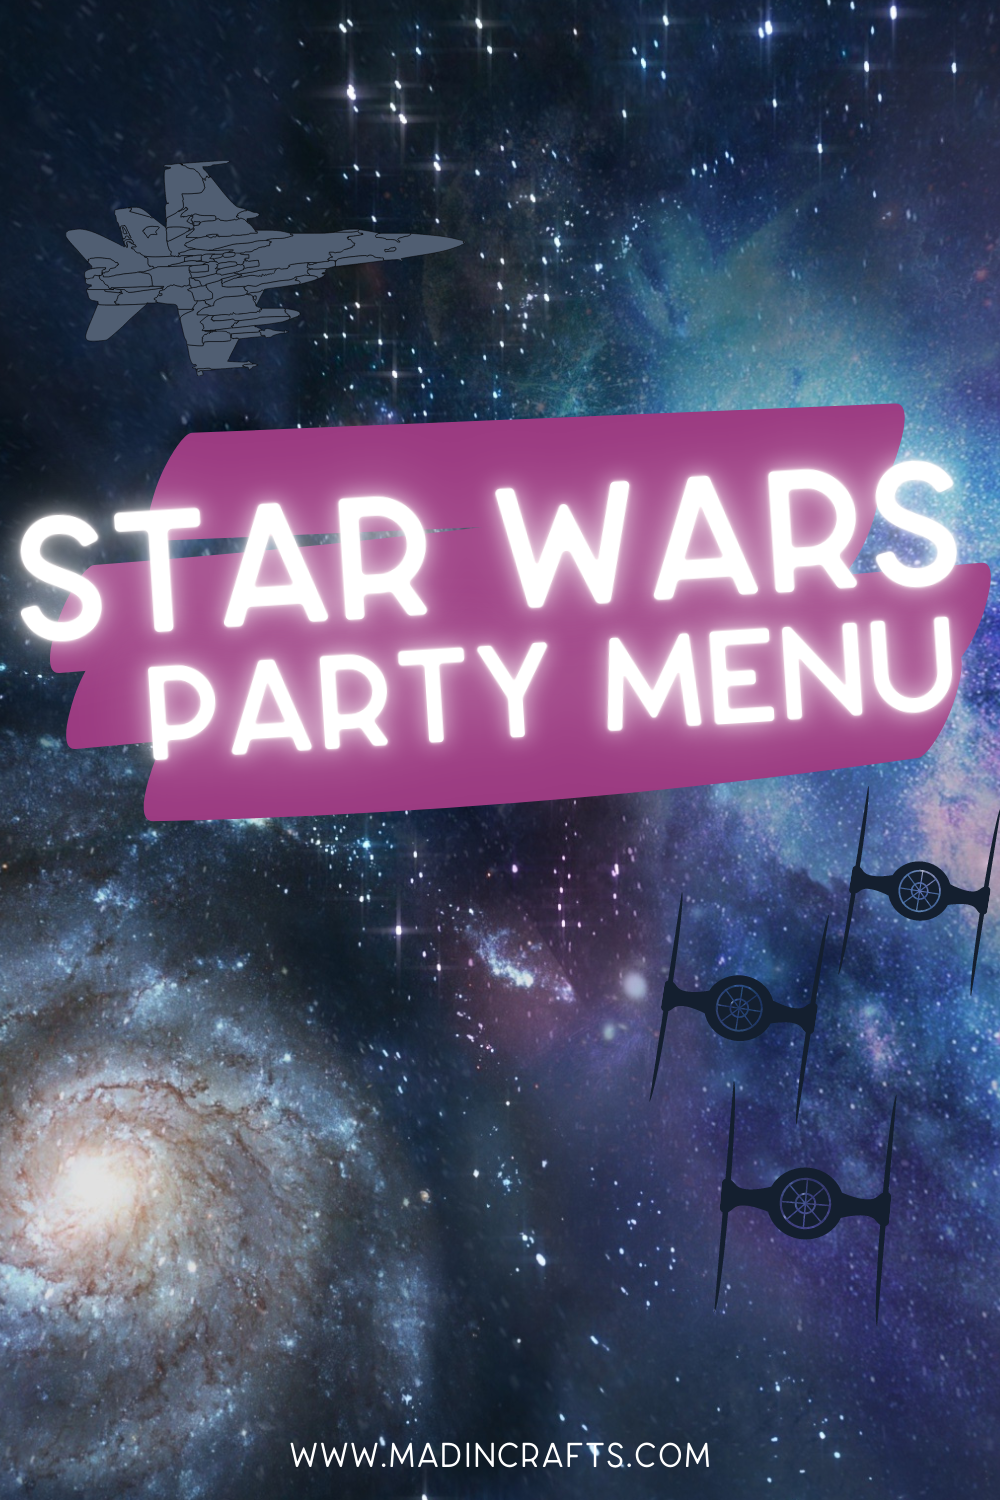 Galaxy image with the words Star Wars Party Menu overlaid